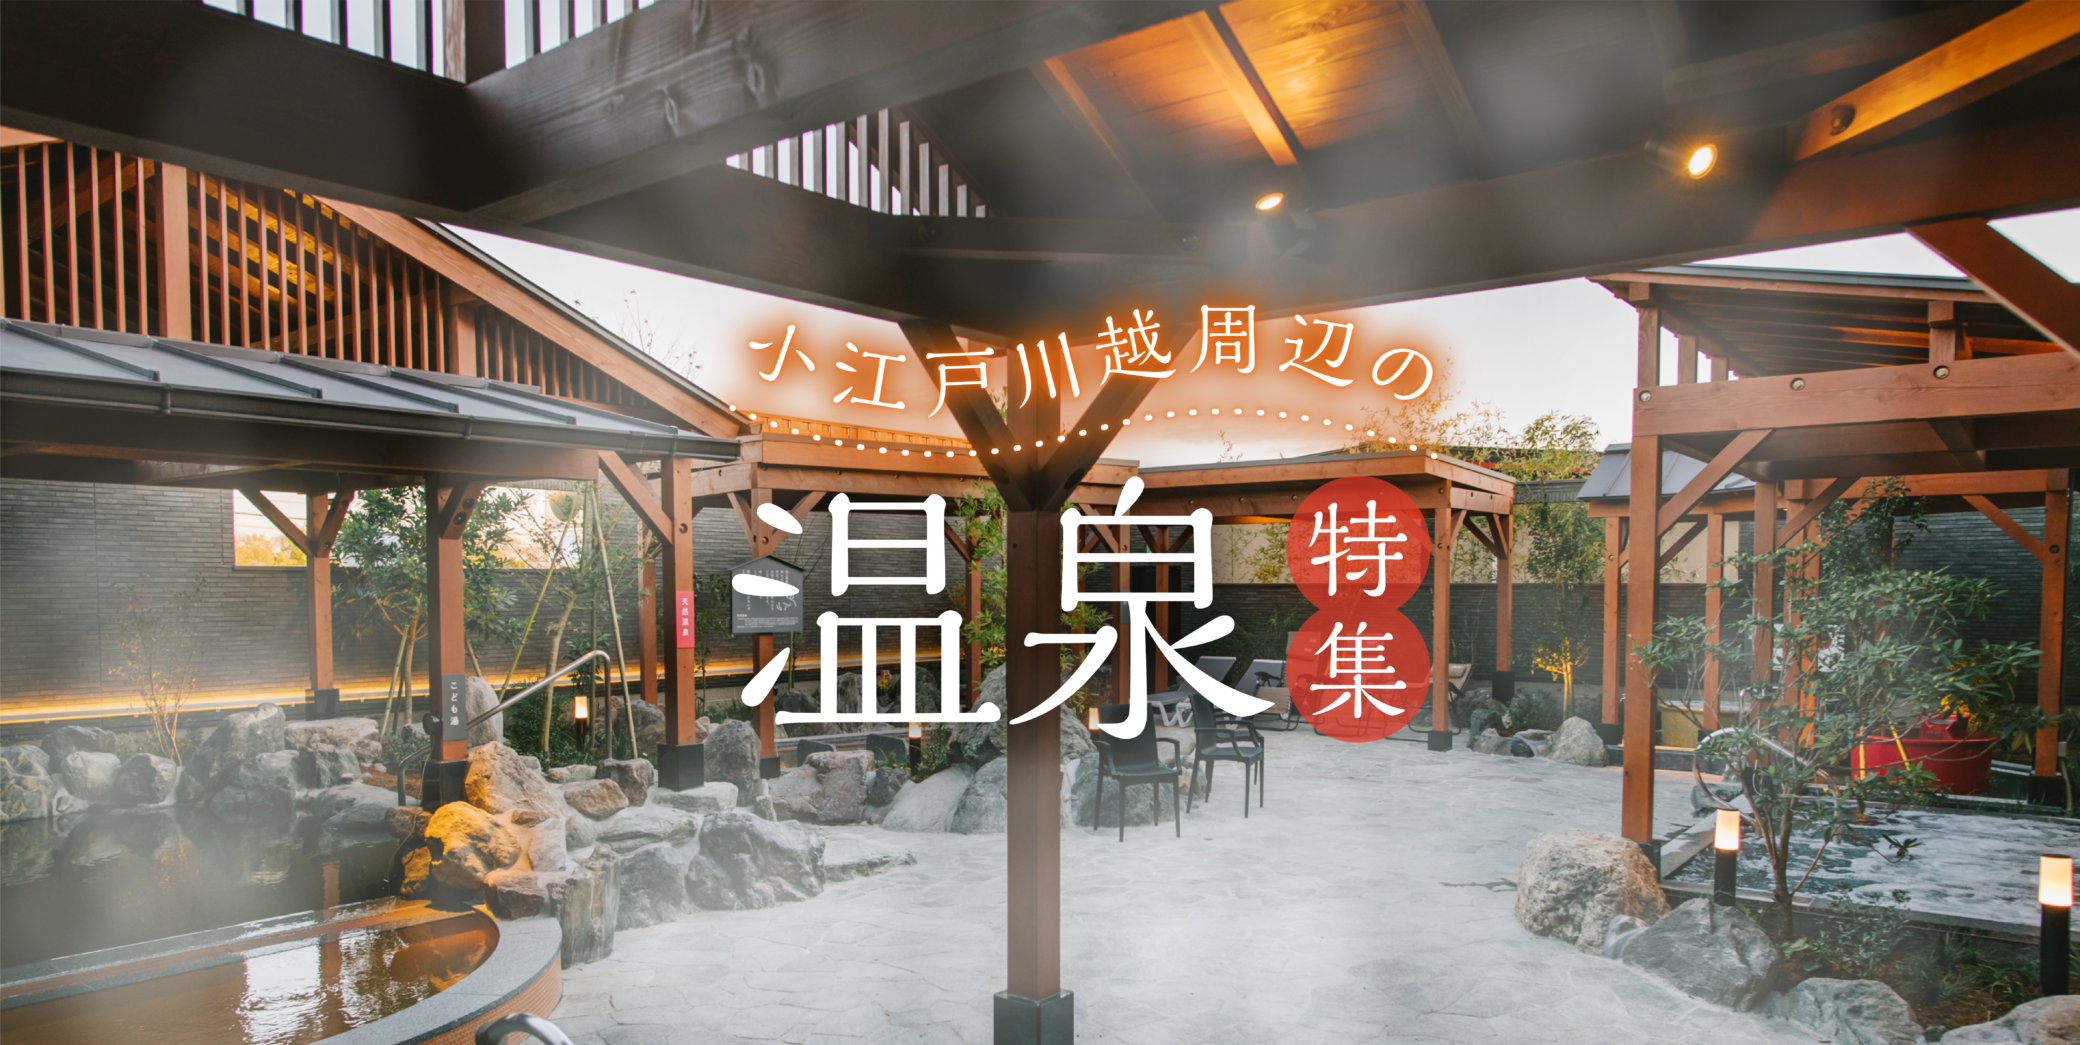 Soak in the bathtub and relax!Special feature on hot springs around Koedo Kawagoe♨️